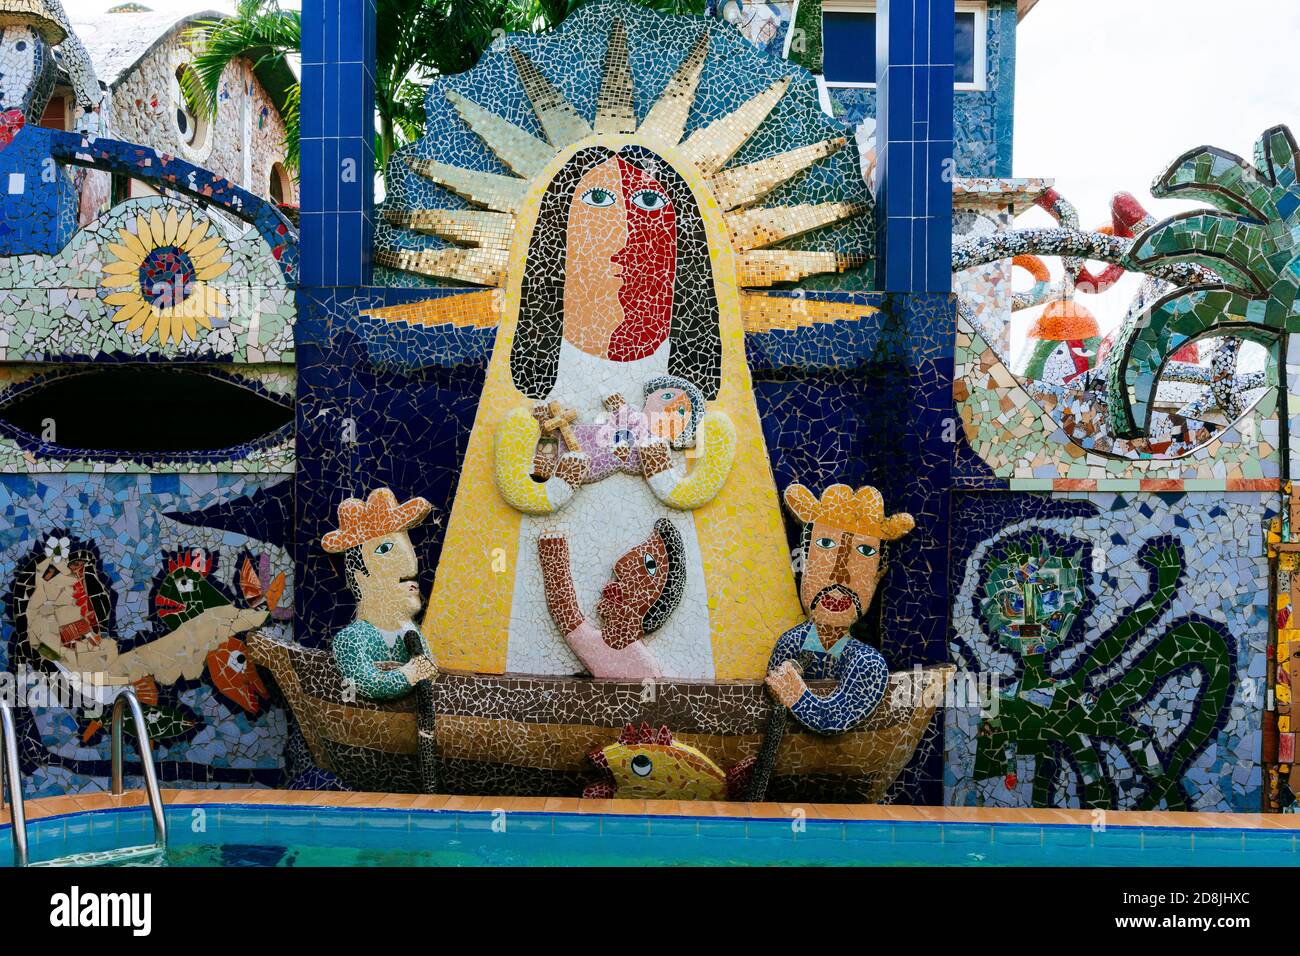 Artist Jose Rodriguez Fuster created Fusterland by decorated his own home with colorful ceramic and mosaic tile in Jaimanitas. La Habana - La Havana, Stock Photo